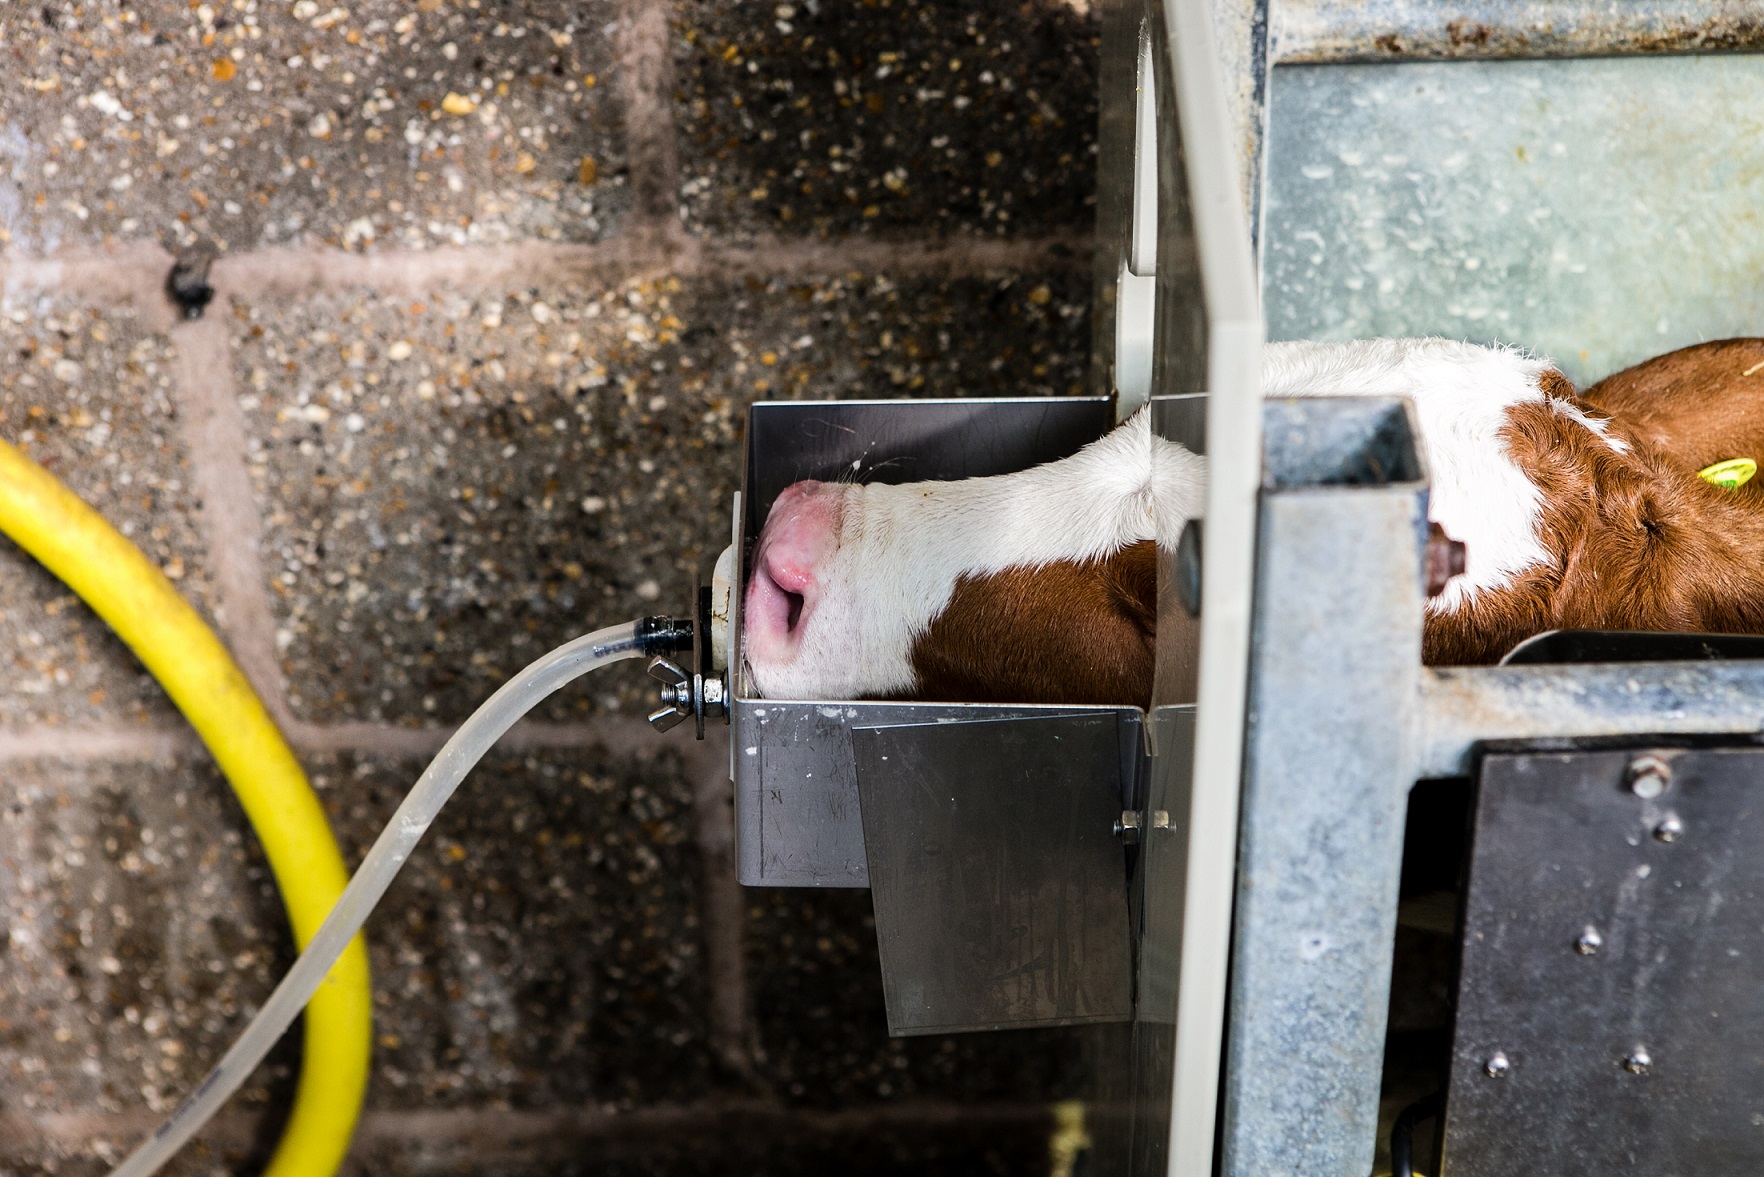 A calf drinking from an automatic milk feeder, the feeder cradles the calf’s head.